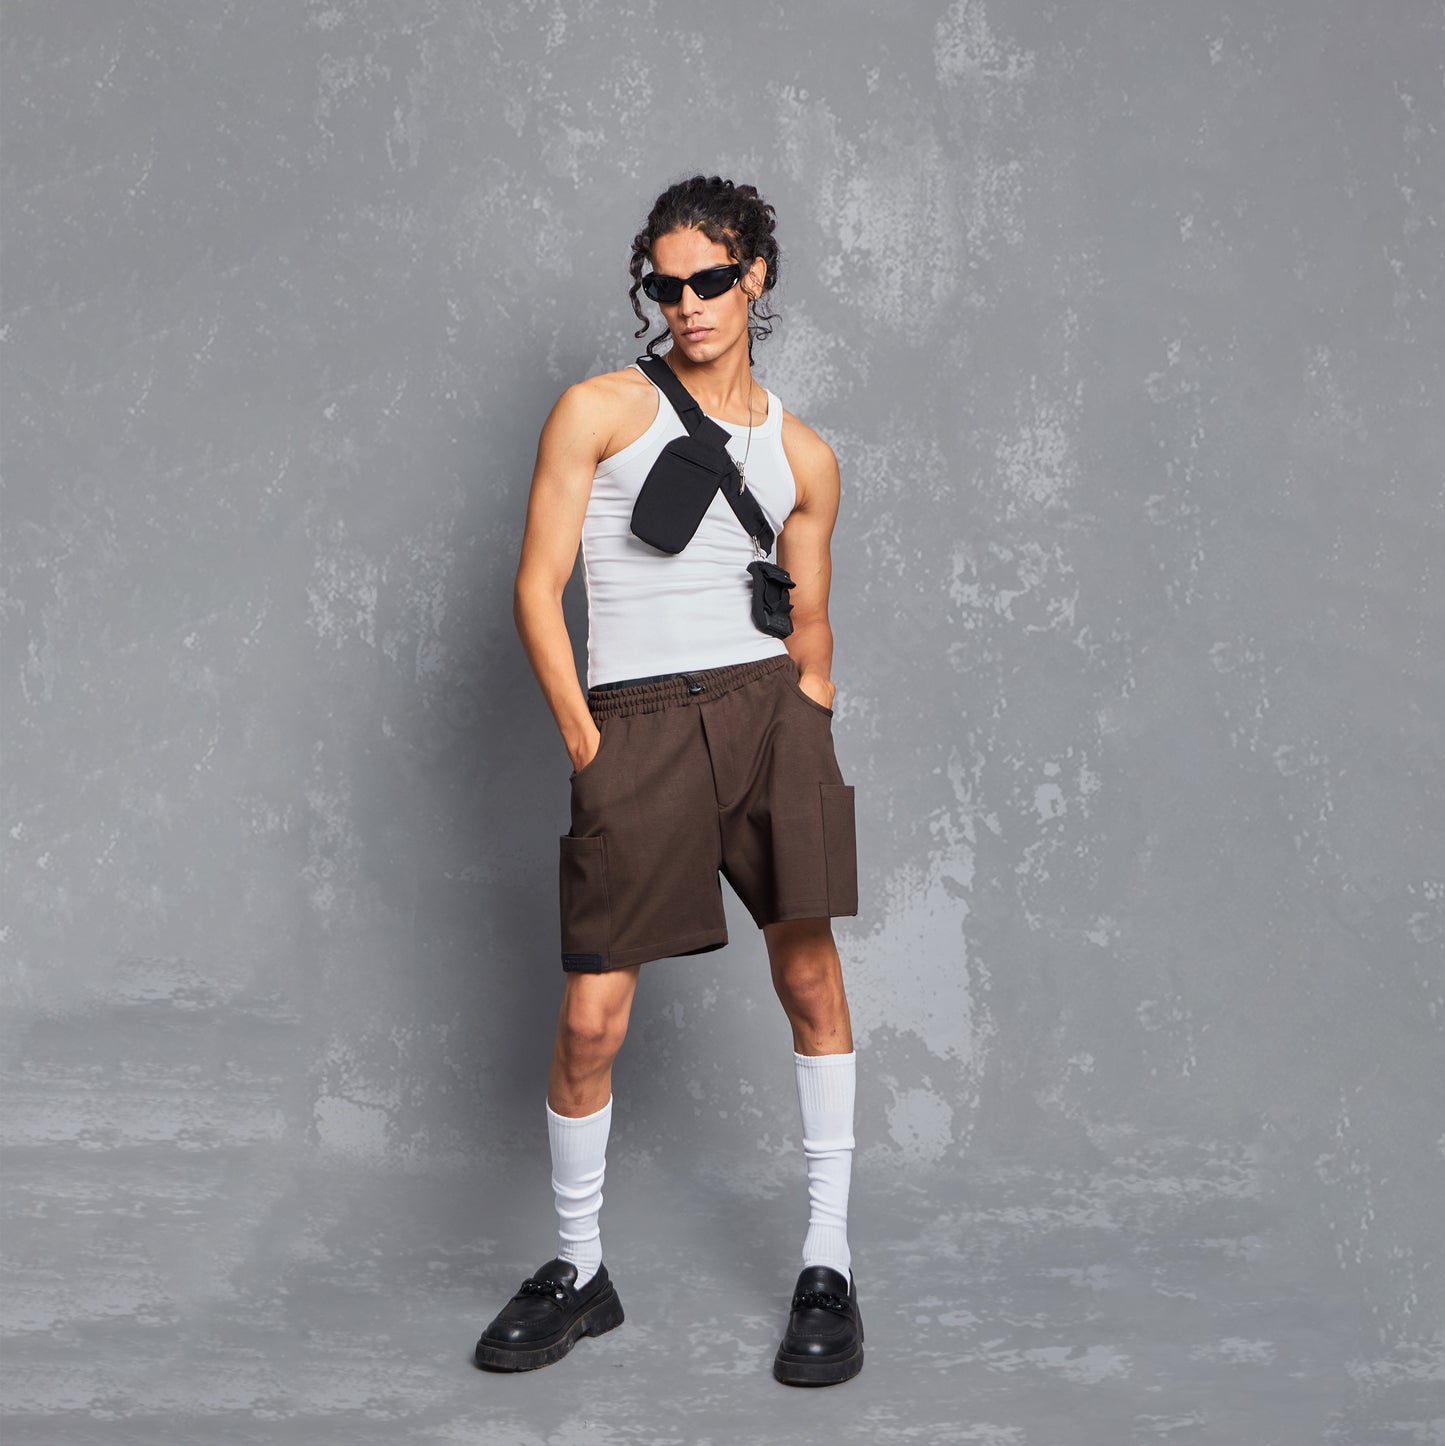 model, spring / summer 2023, warping theories, collection, lifestyle, smart casuals, brown shorts, men's shorts, every day outfit, styling inspiration, utility pocket, waistband, people also ask